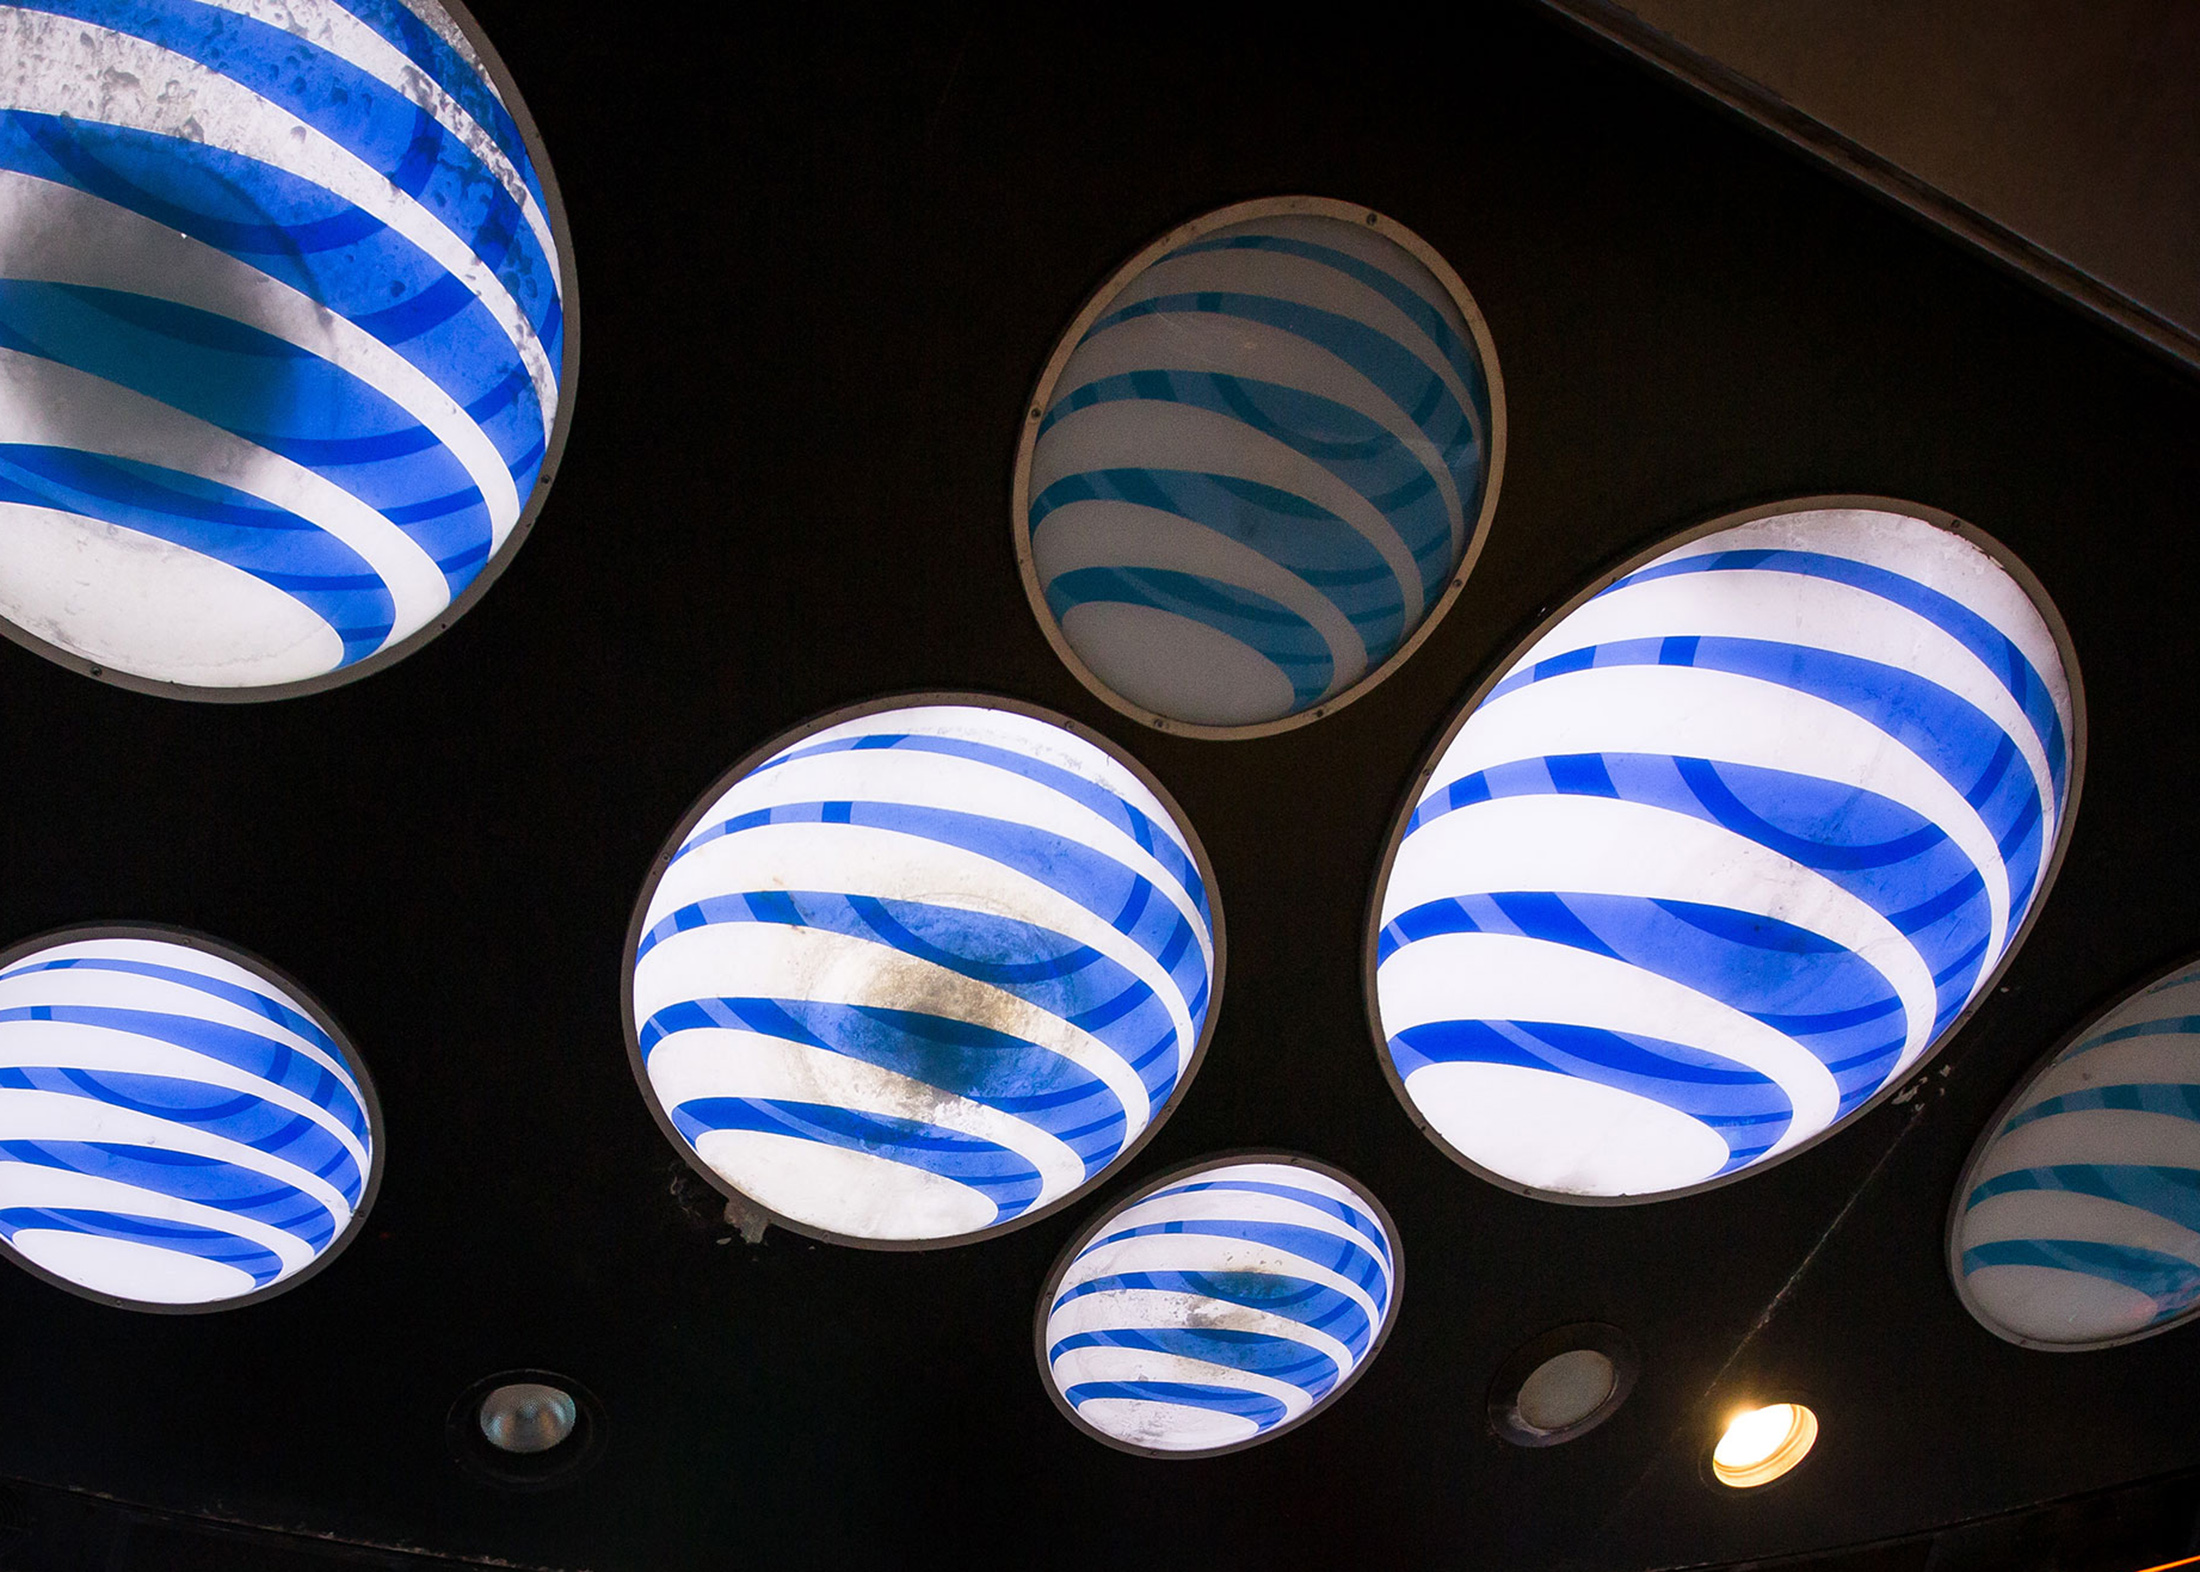 AT&T Inc. signage is displayed at the company\'s store in the Times Square area of New York, U.S., on Saturday, Oct. 22, 2016. According to a statement Saturday, AT&T agreed to buy Time Warner for $107.50 a share.